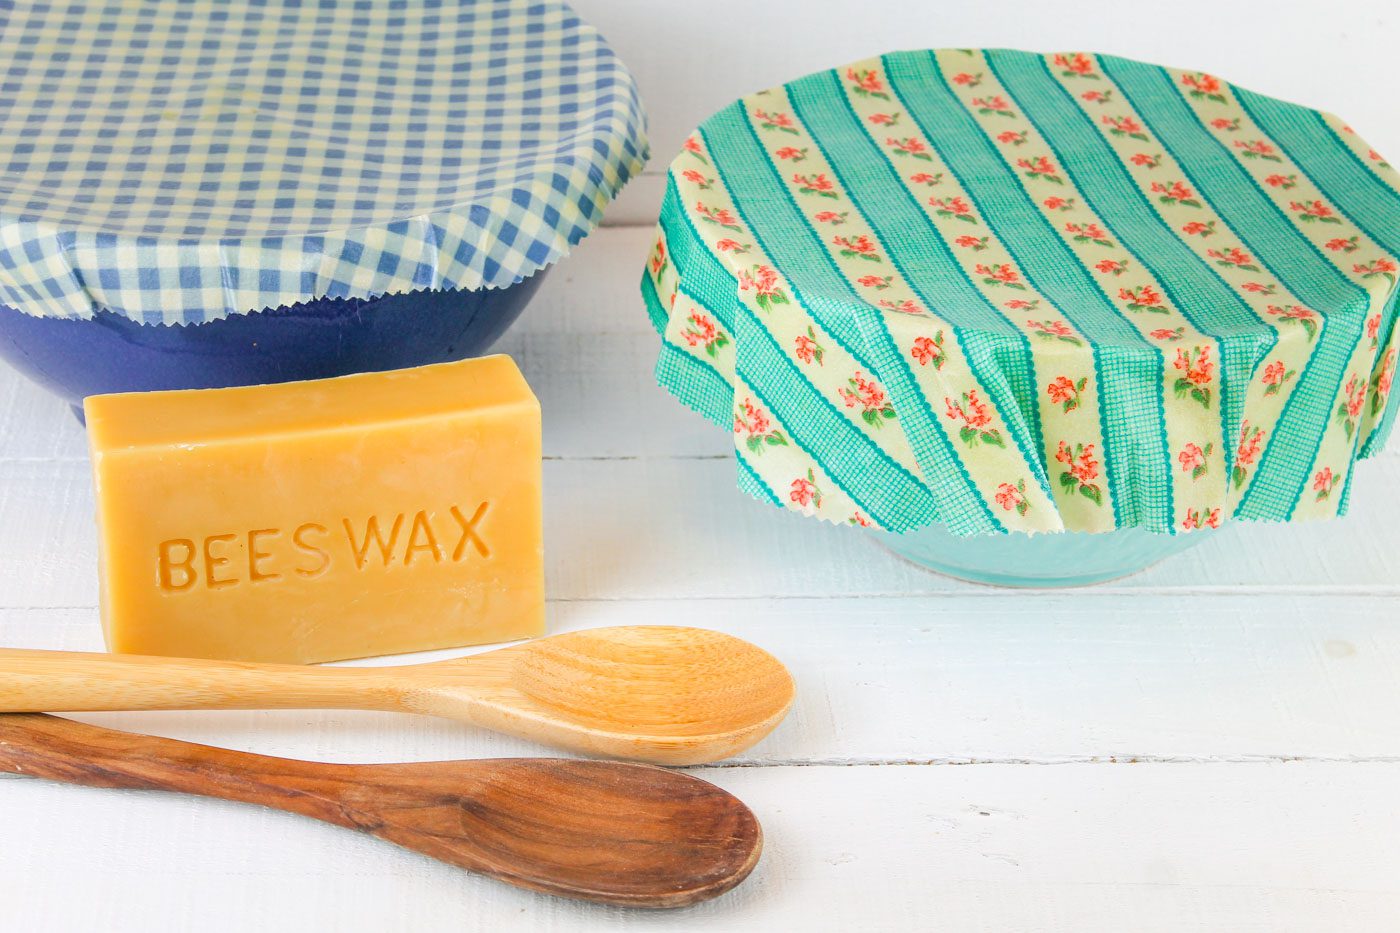 two mixing bowls covered in a diy beeswax wrap sit beside some wooden spoons and a block of solid beeswax